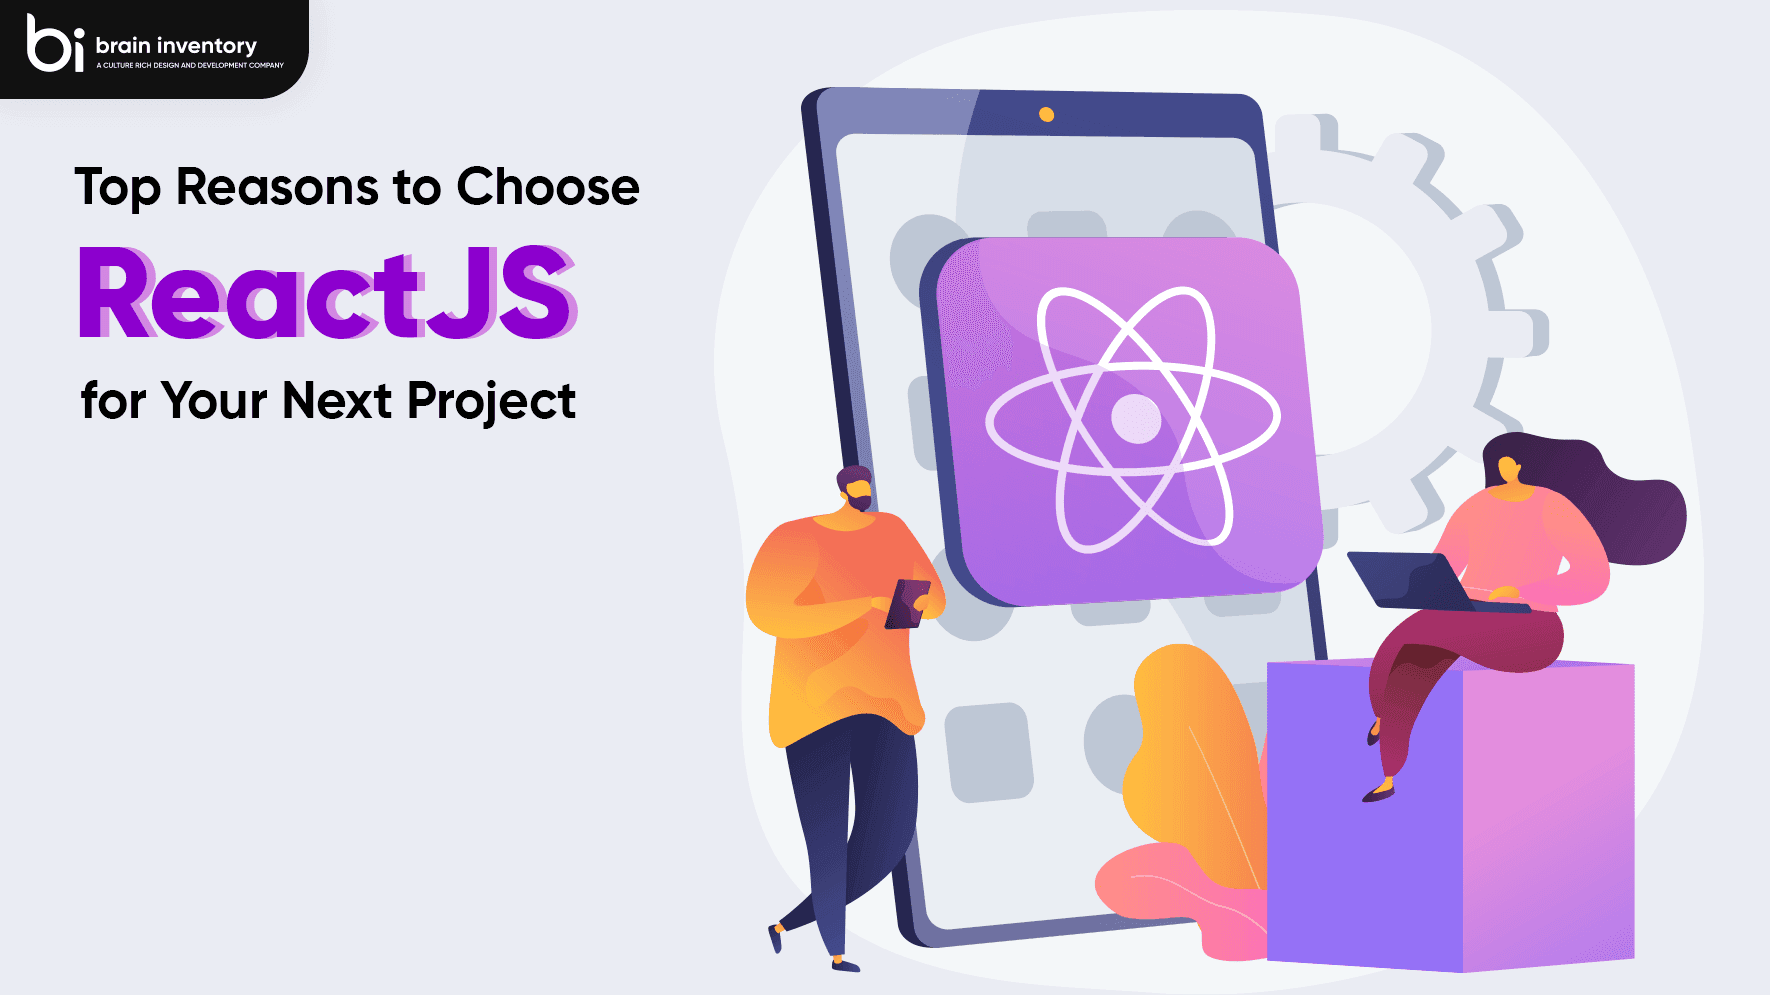 Top Reasons to Choose ReactJS for Your Next Project